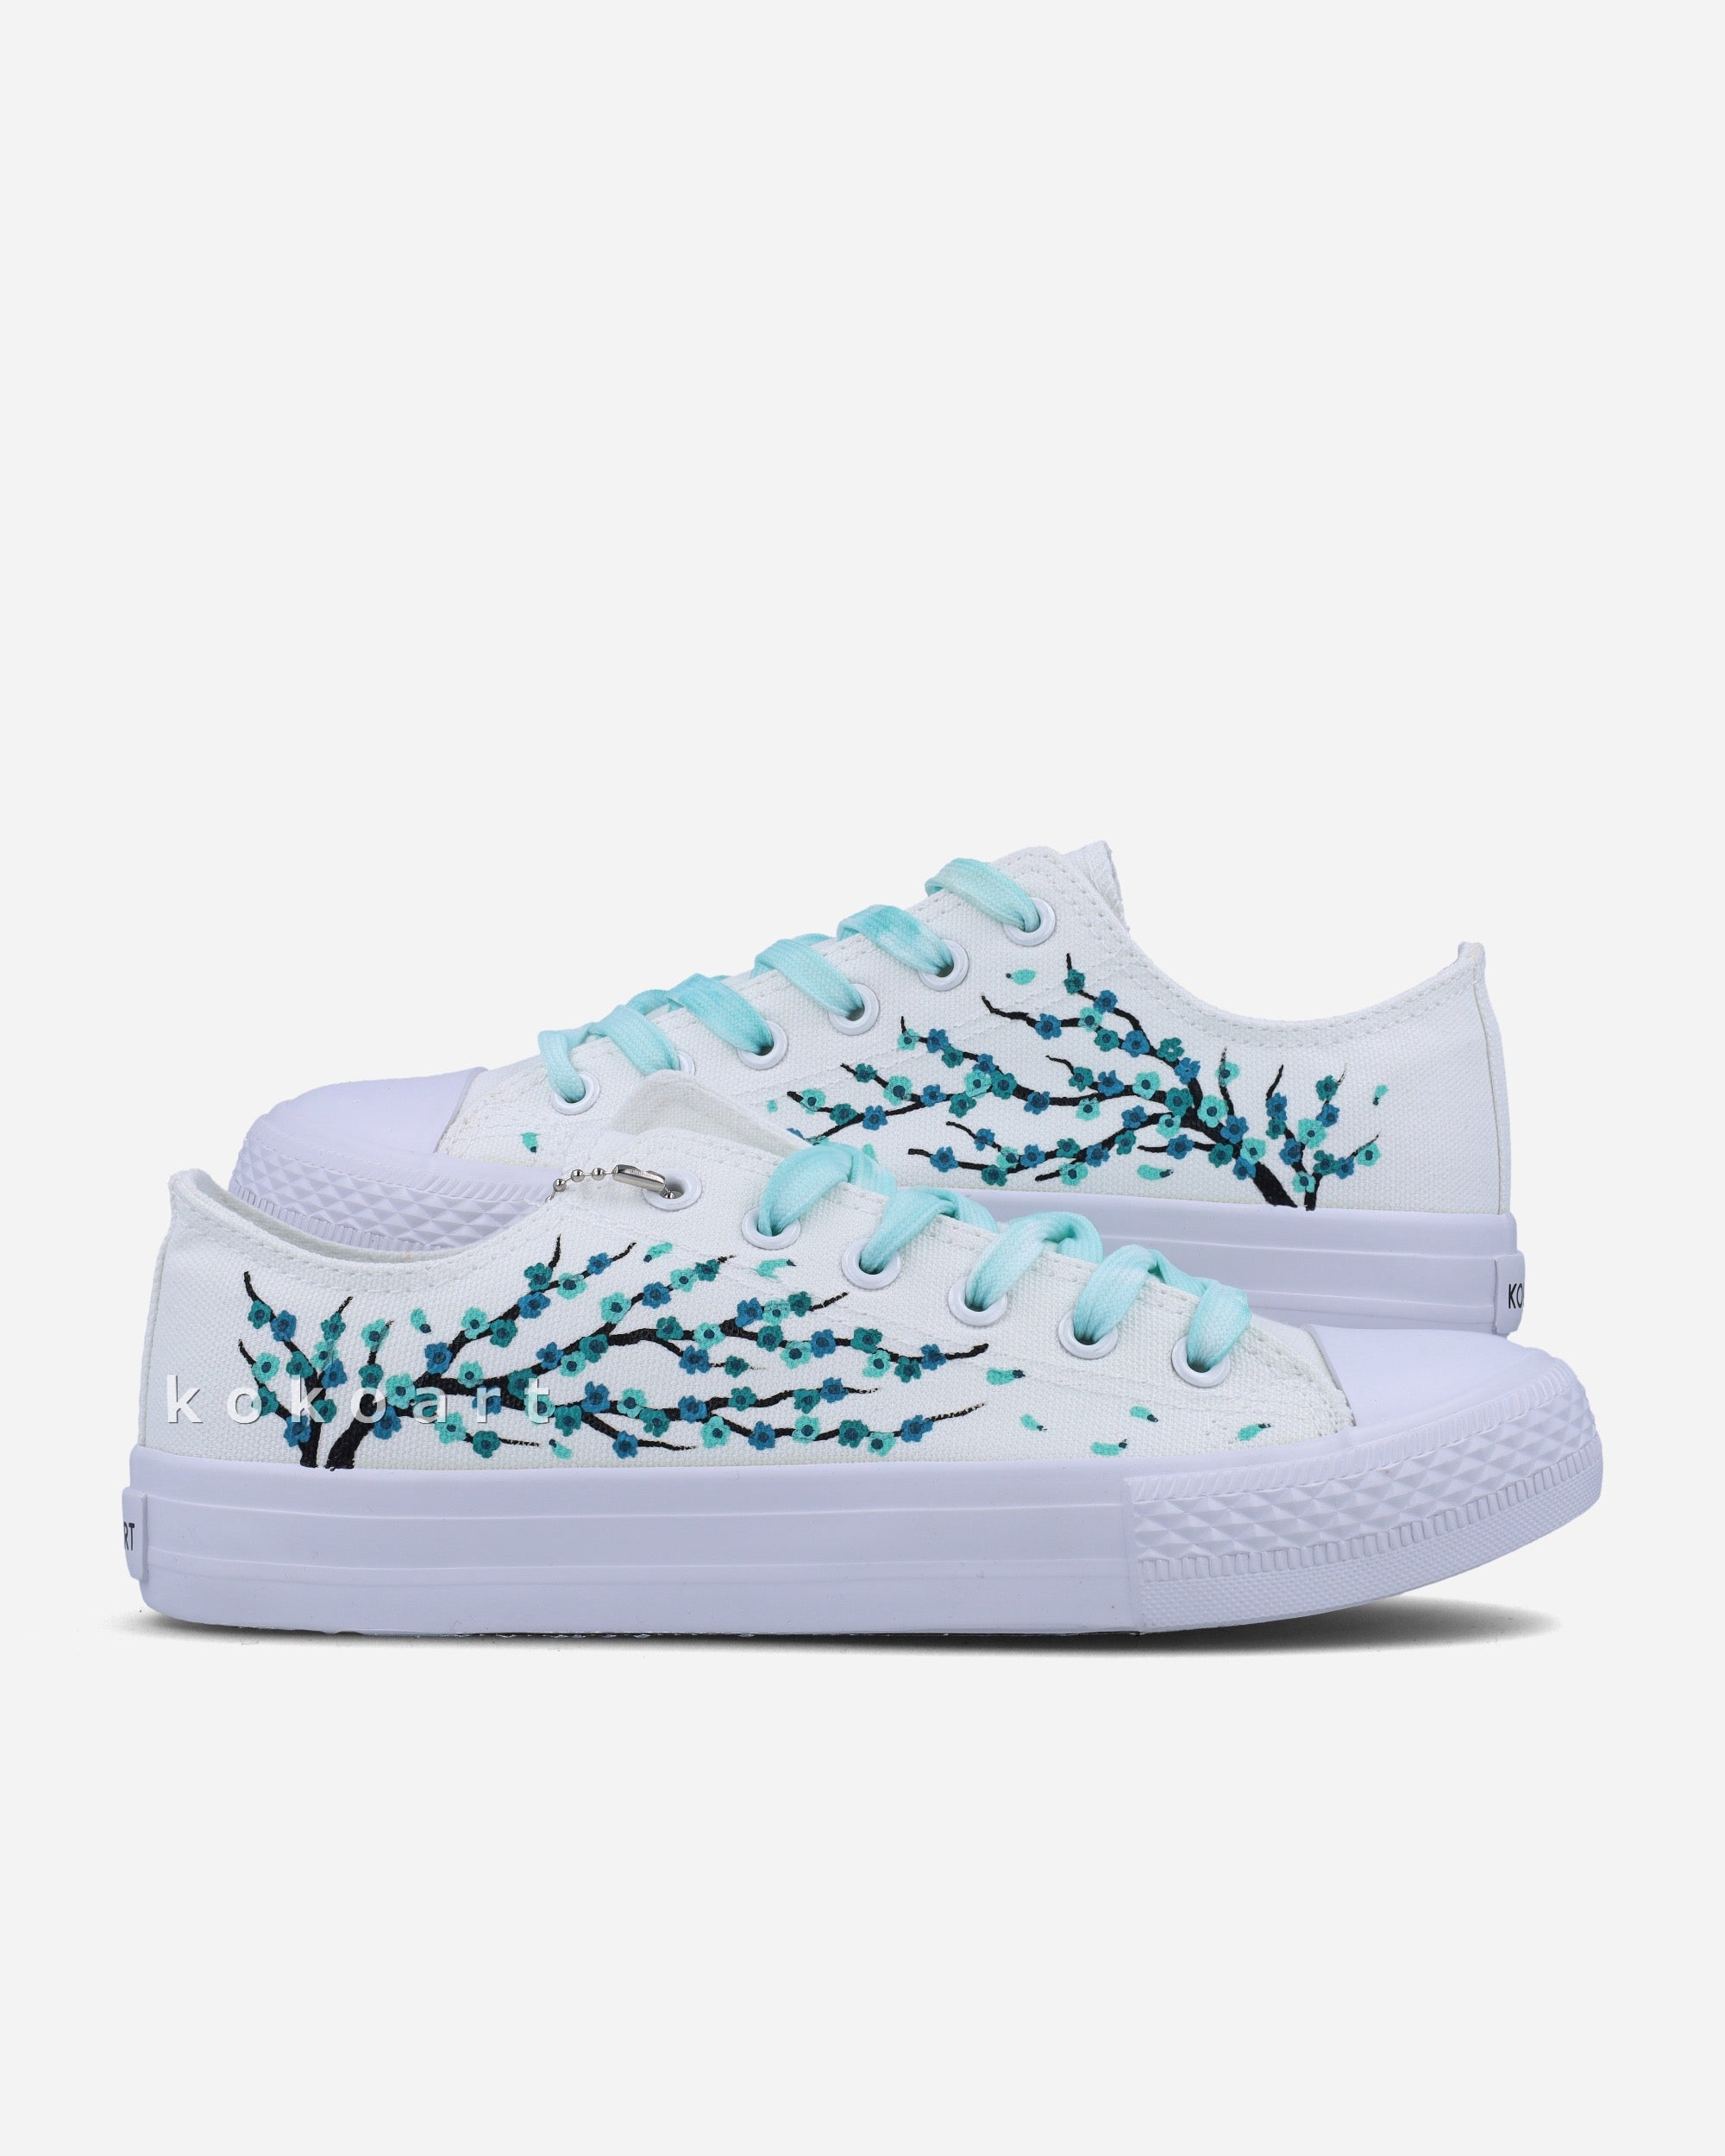 Turquoise Cherry Blossom Hand Painted Shoes